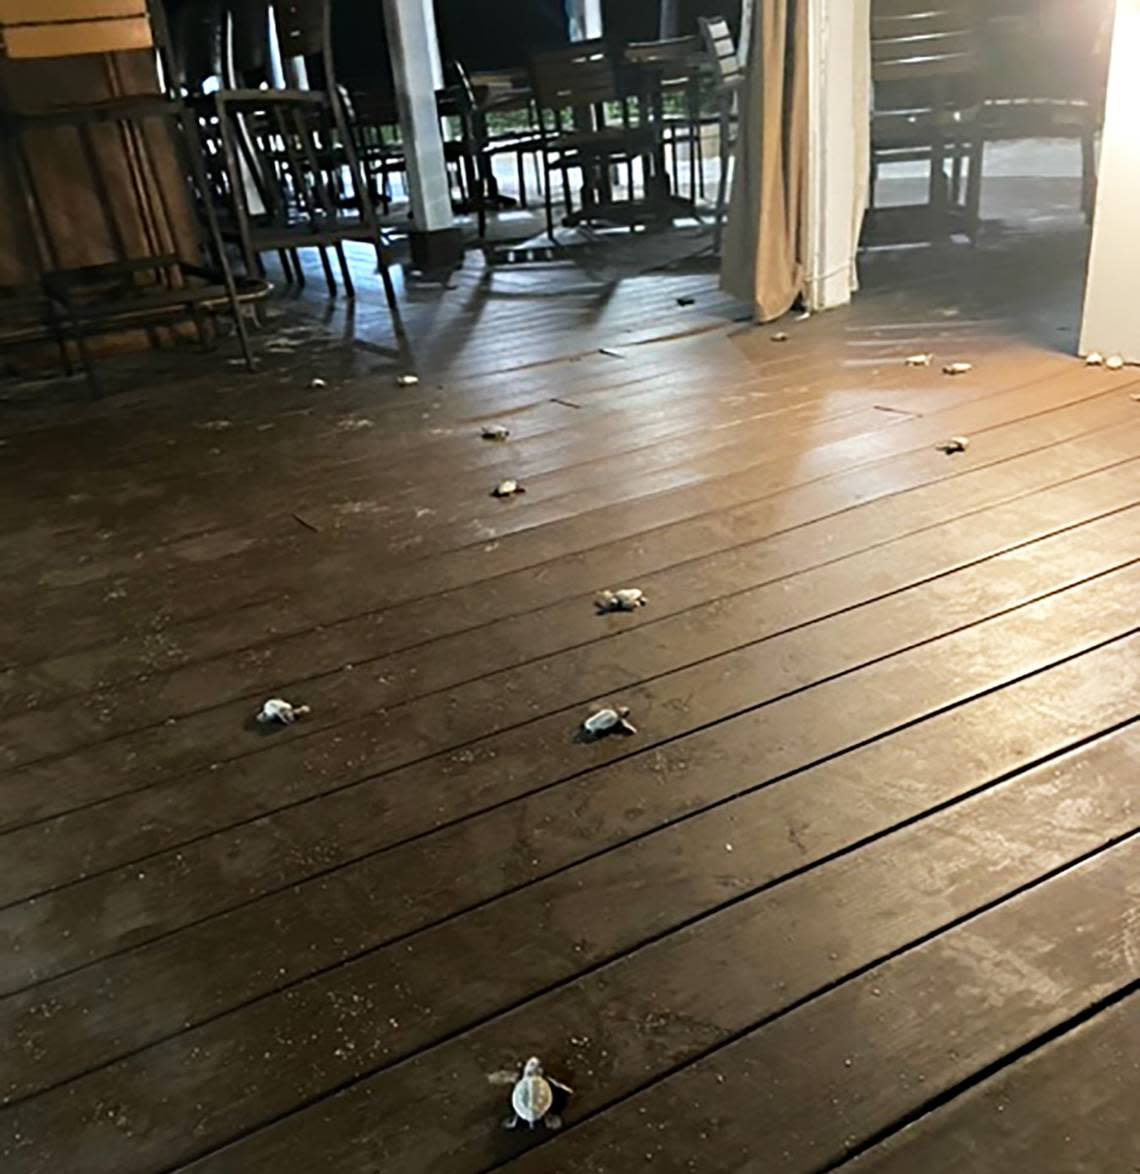 A group of newborn baby sea turtles crawl across a restaurant’s deck in Key West on July 18, 2022.